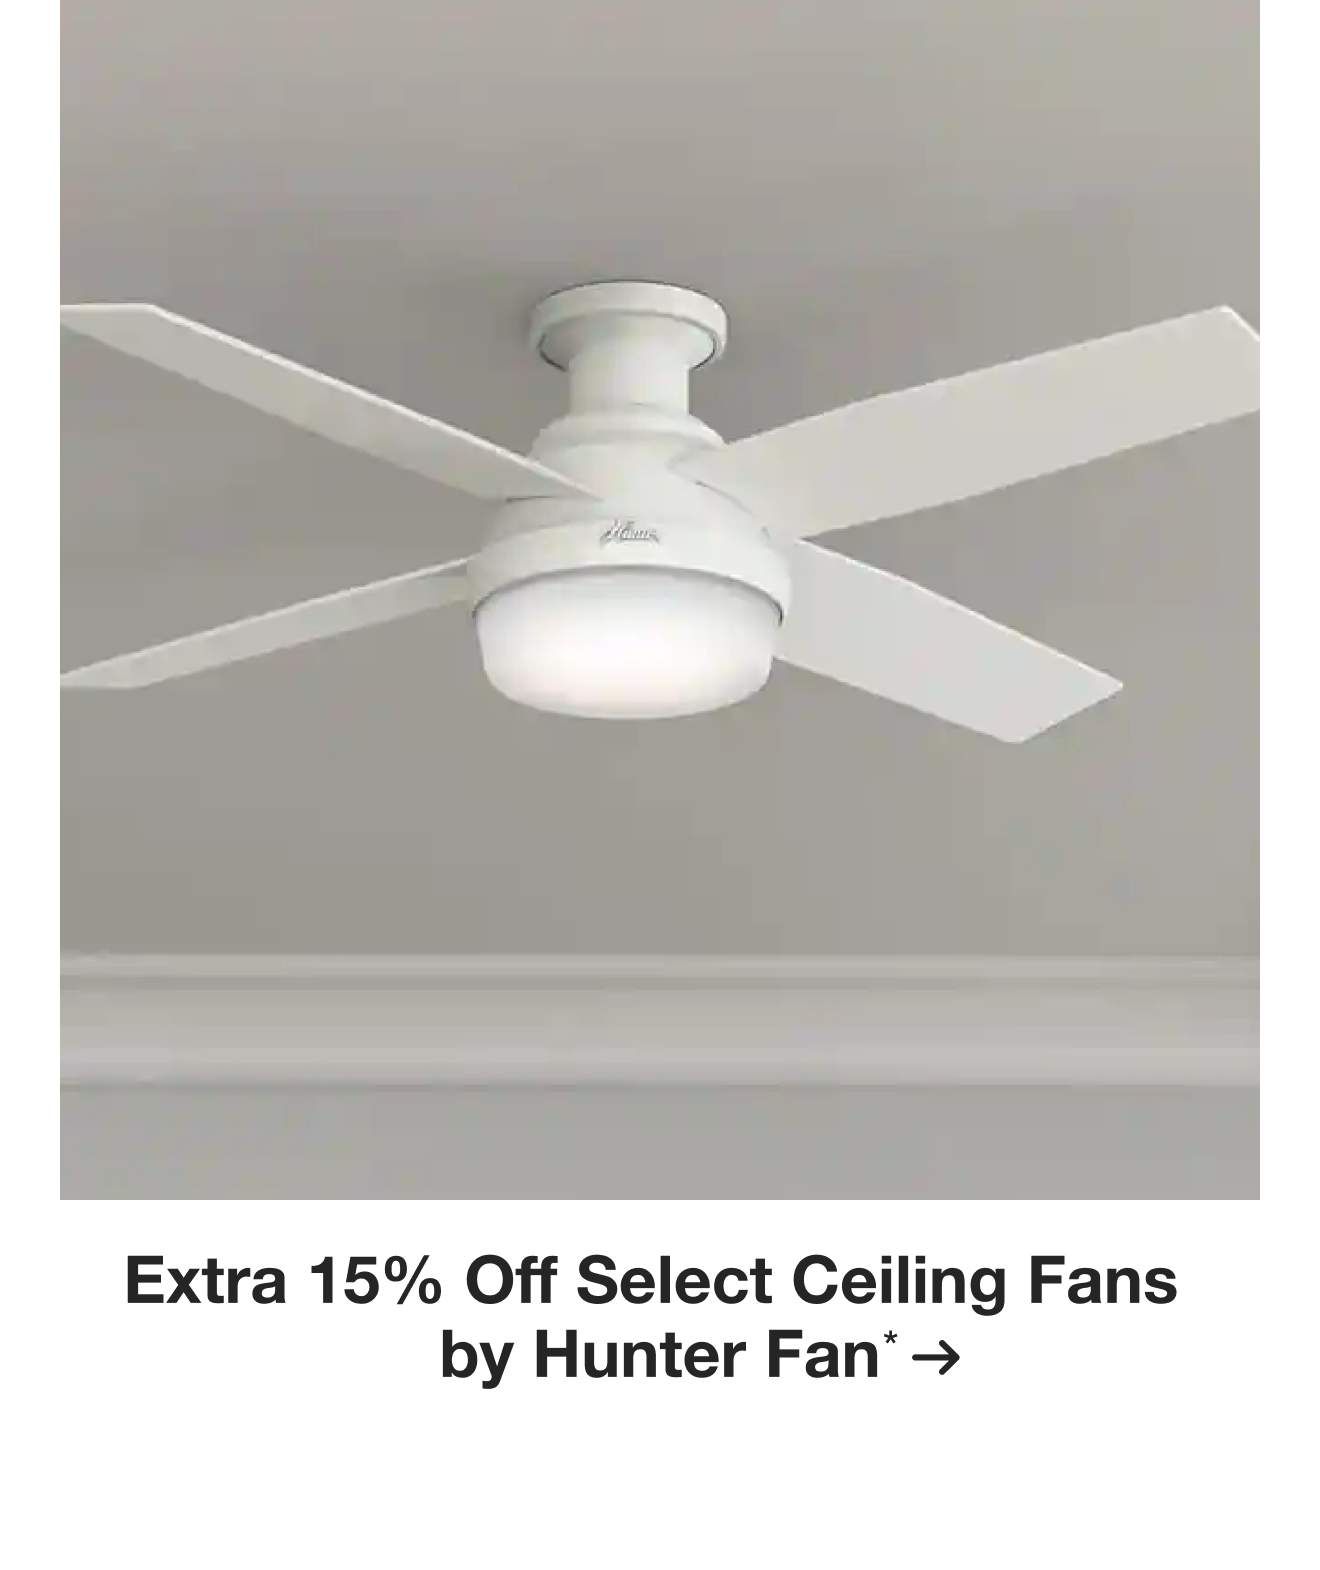 Extra 15% off Select Ceiling Fans by Hunter Fan*